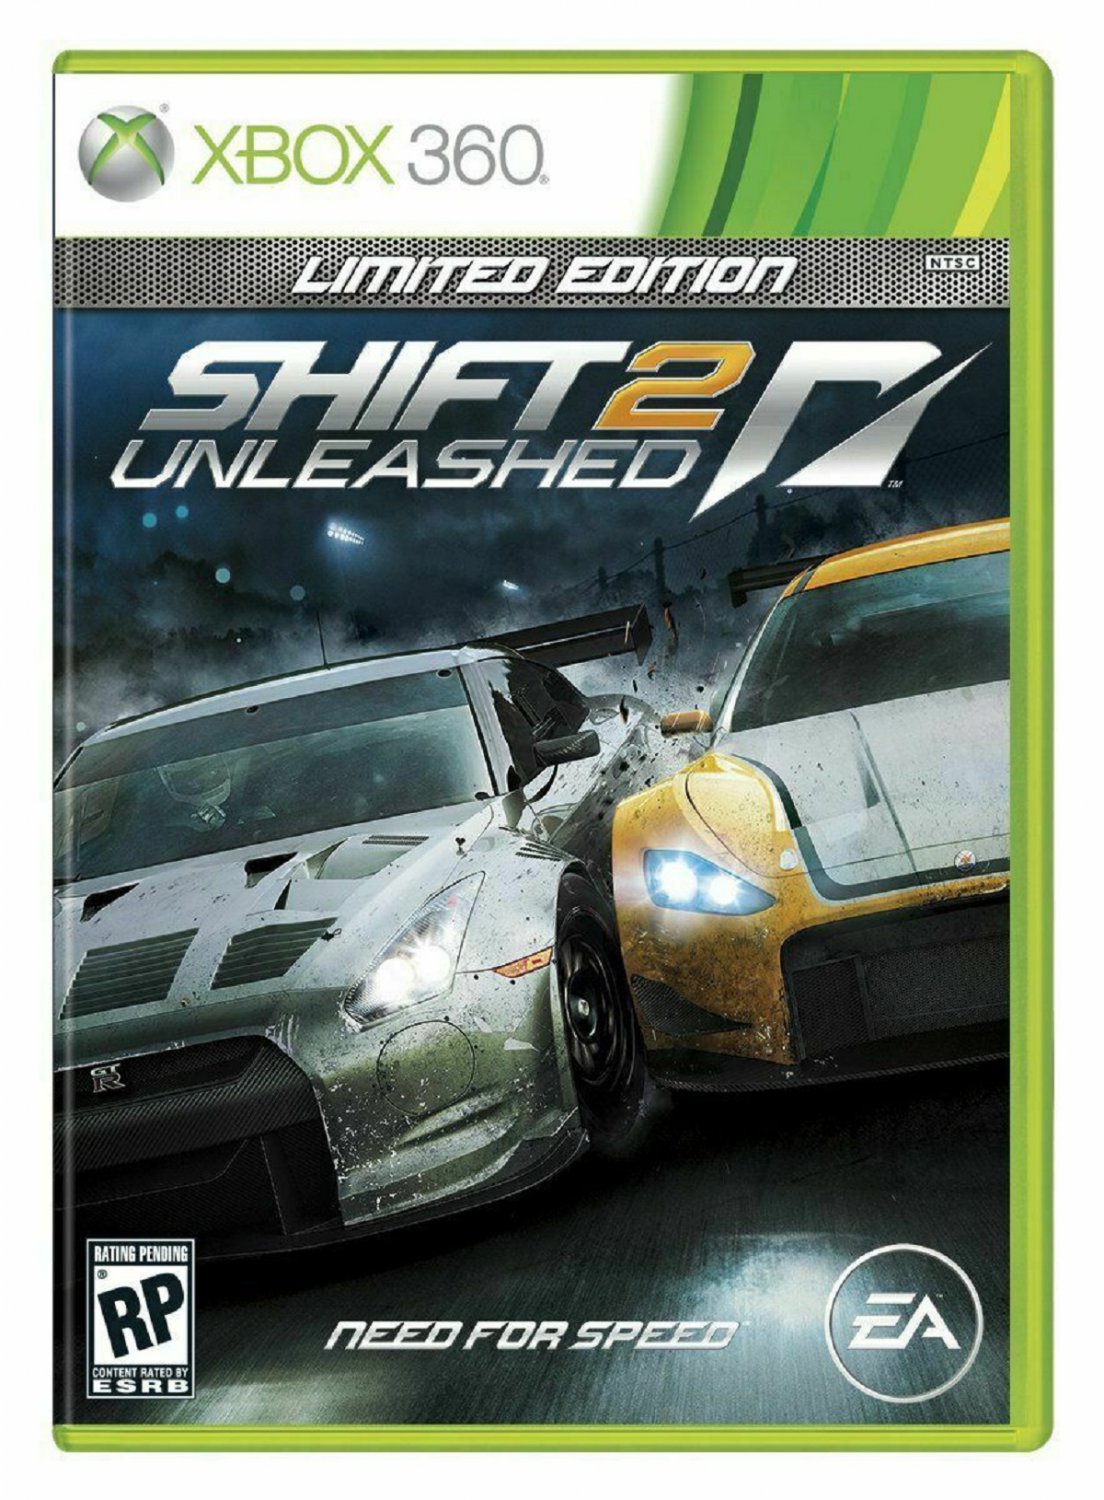 shift-2-unleashed-need-for-speed-limited-edition-xbox-360